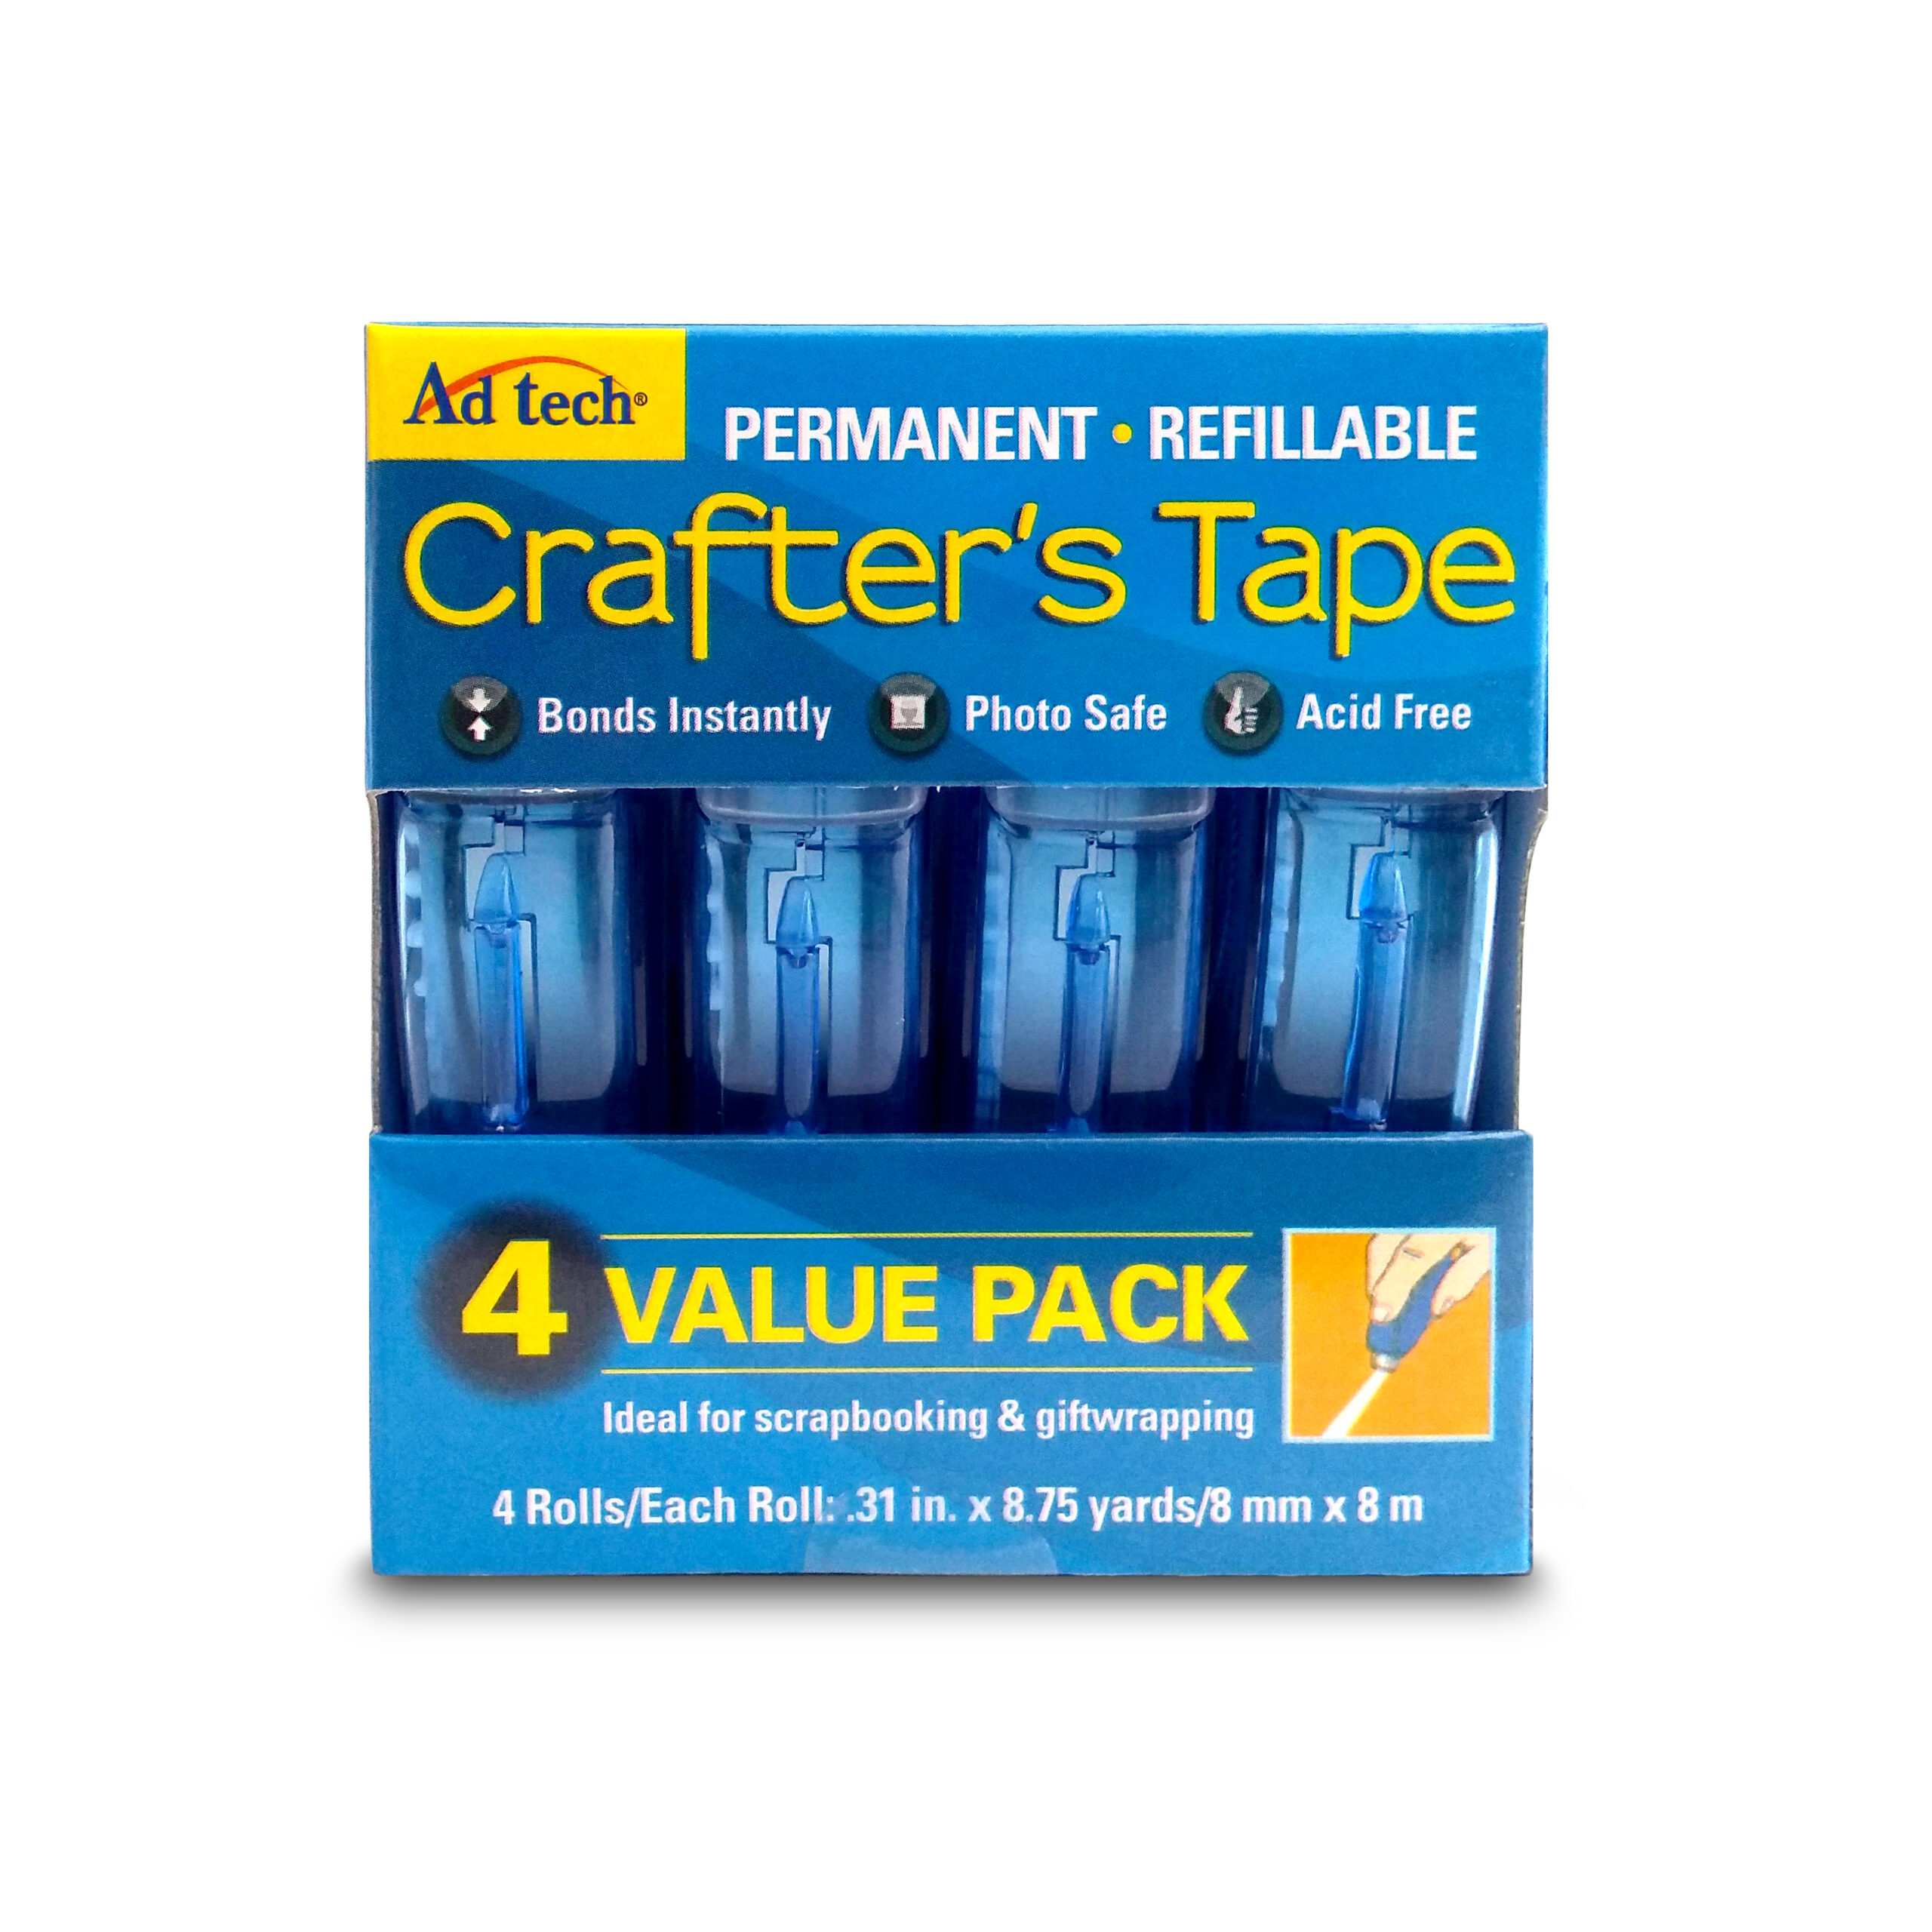 Crafters Glue Tape Runner - Permanent